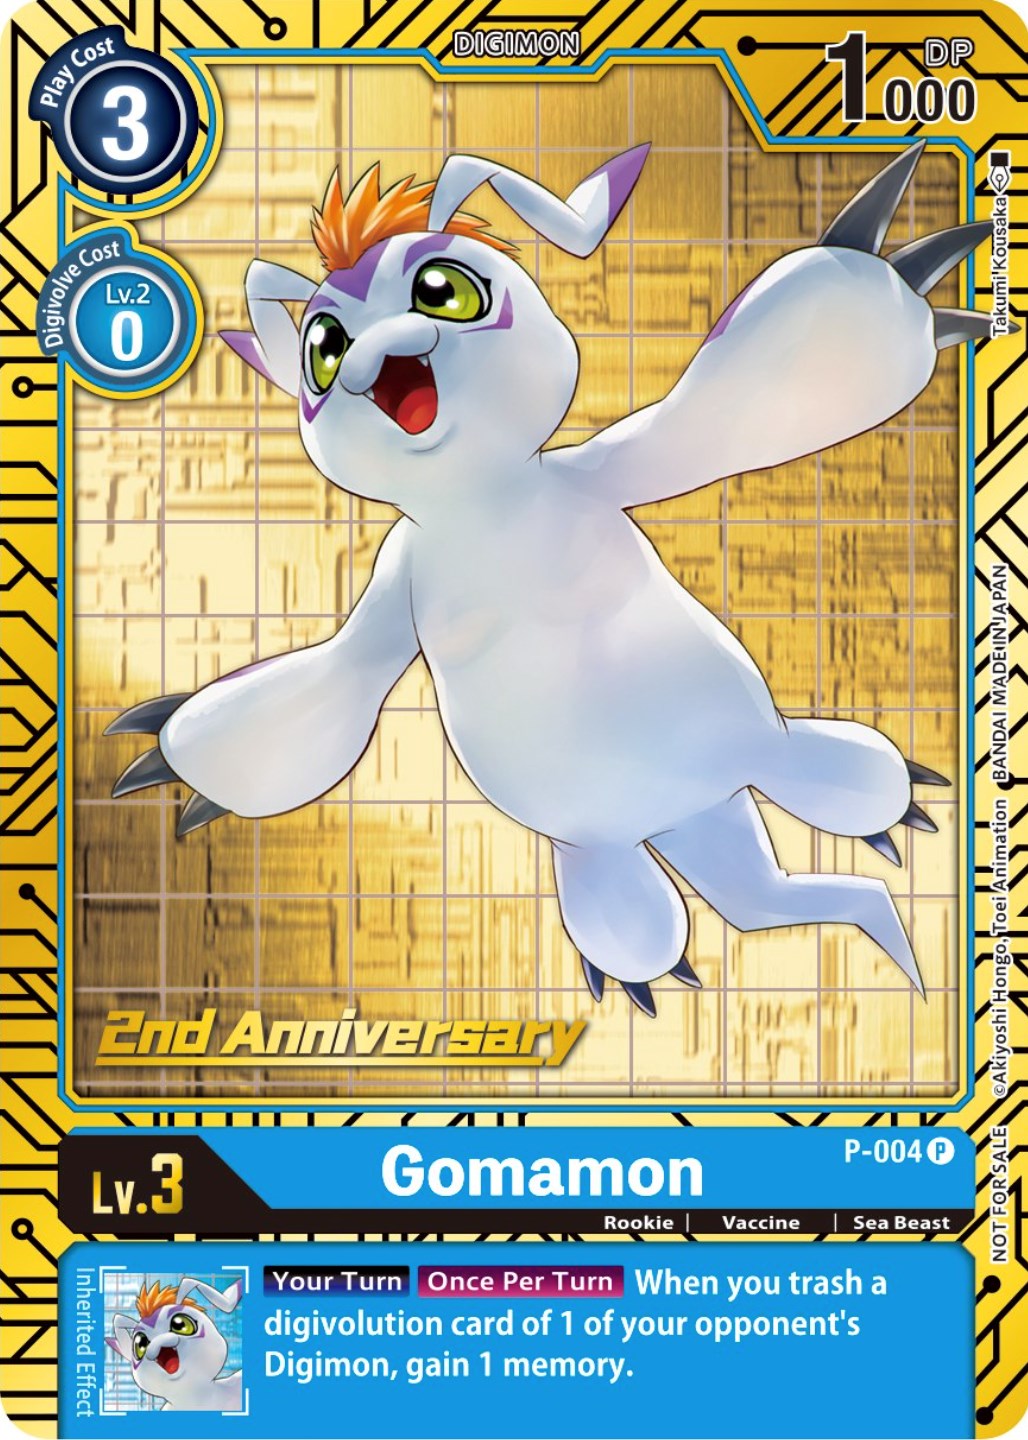 Gomamon [P-004] (2nd Anniversary Card Set) [Promotional Cards] | The Time Vault CA